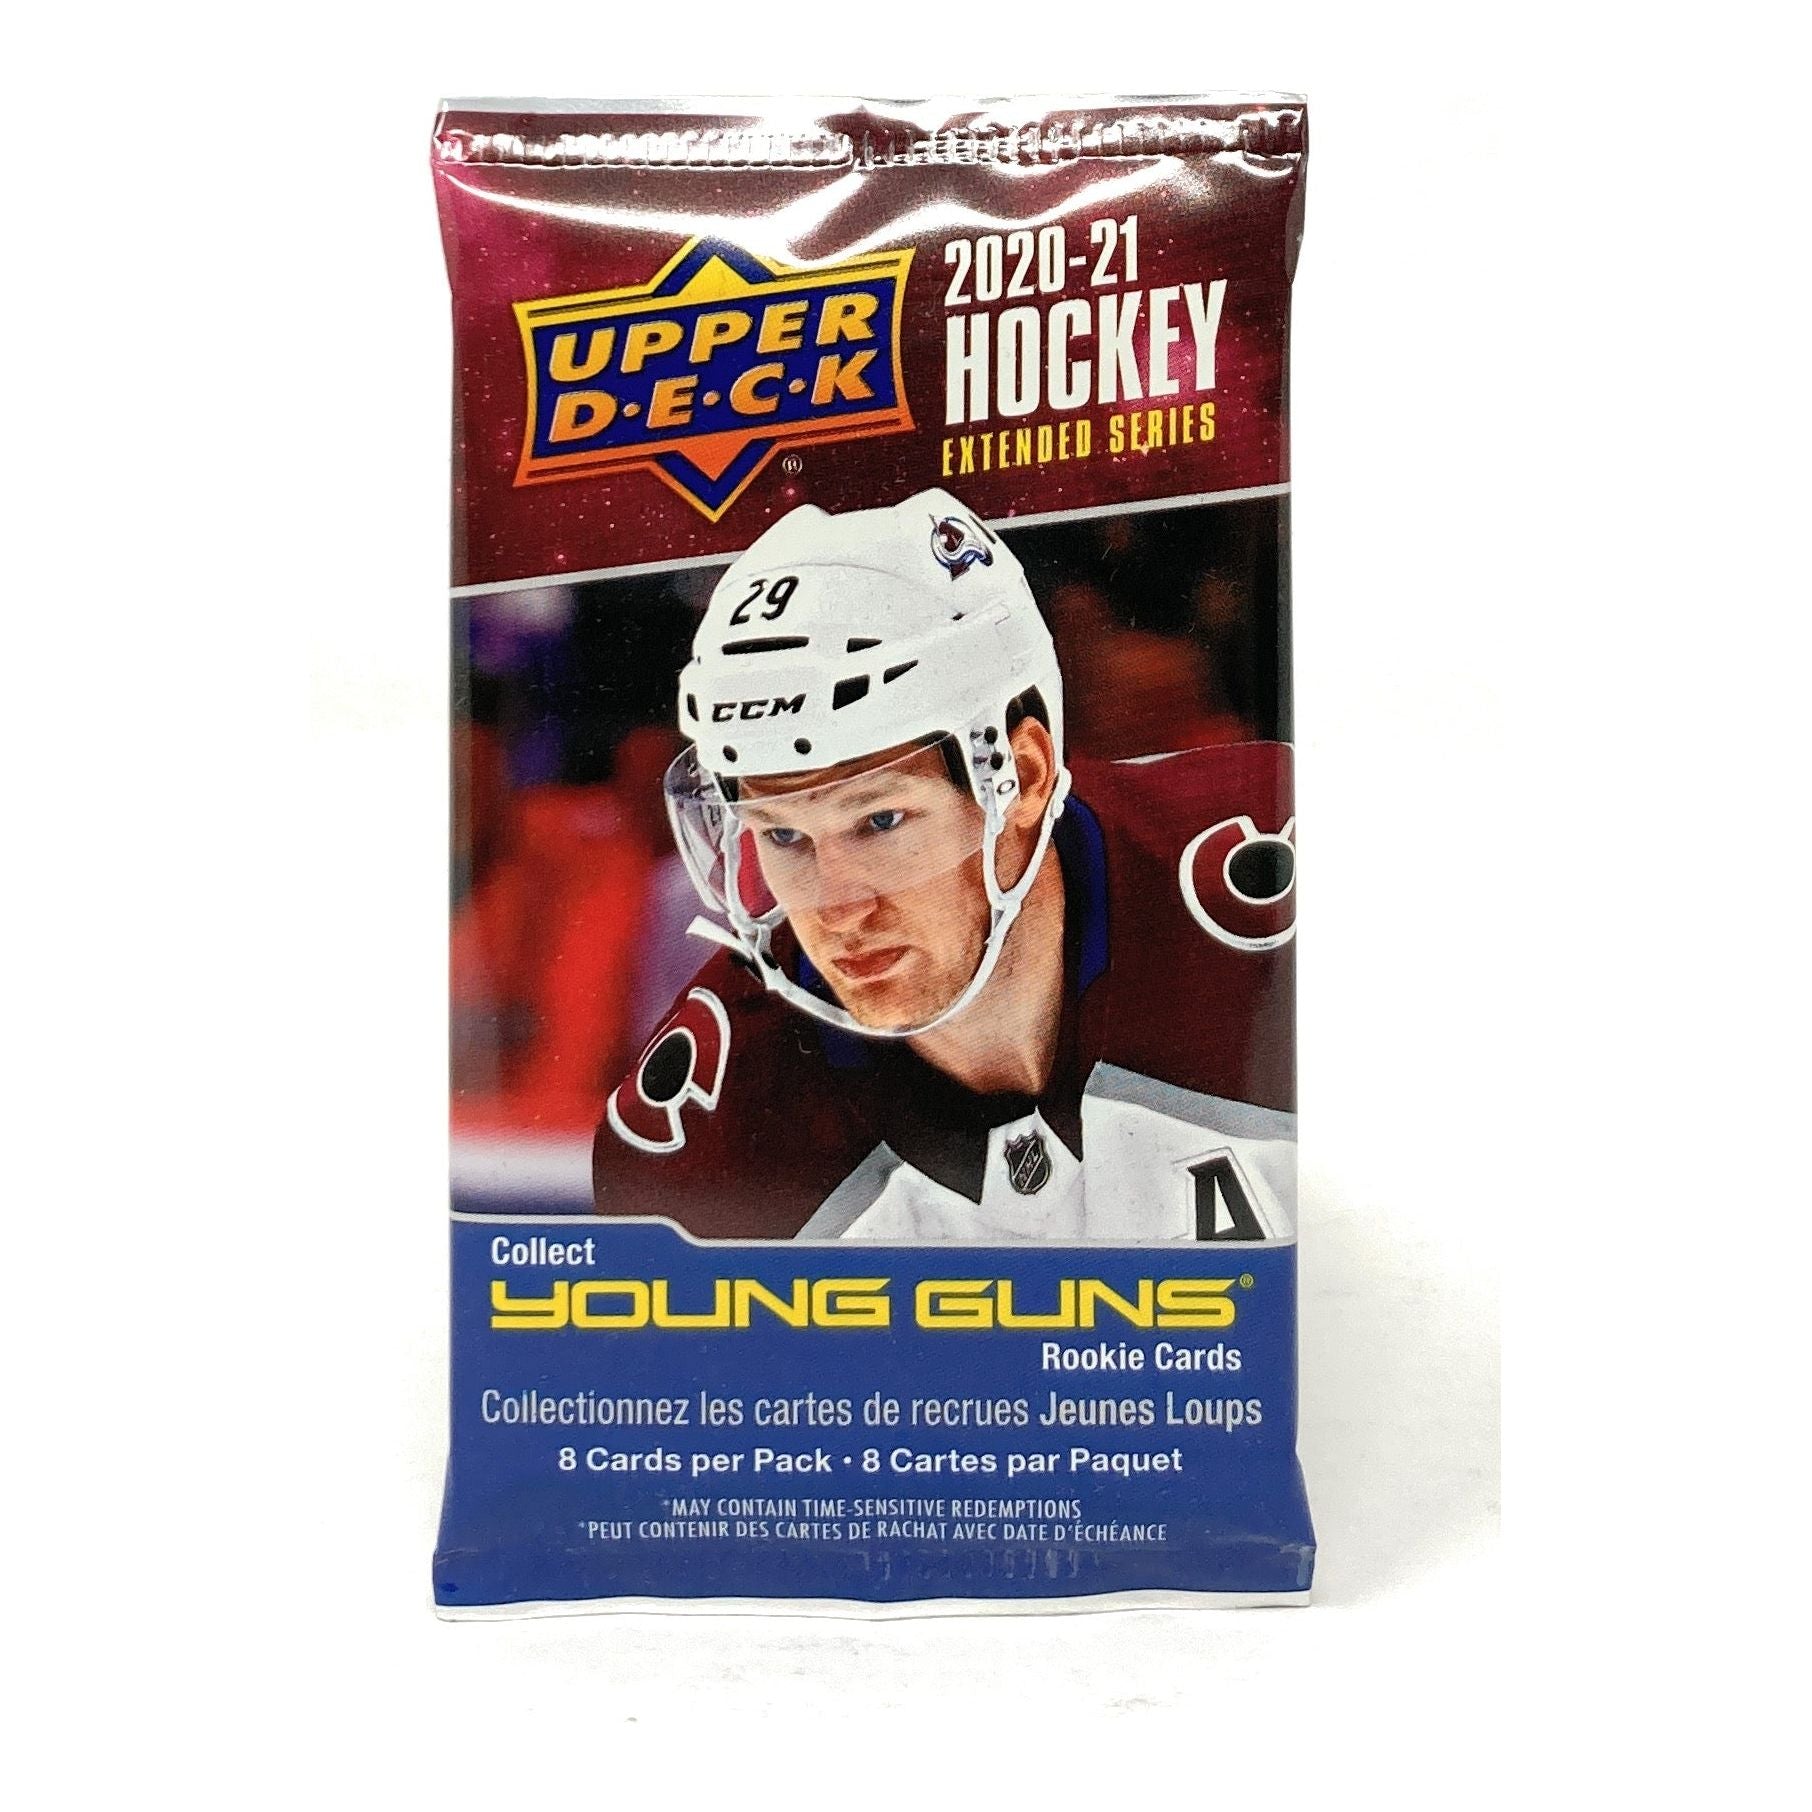 2020-21 Upper Deck Hockey Extended Series Retail Box - King Card Canada